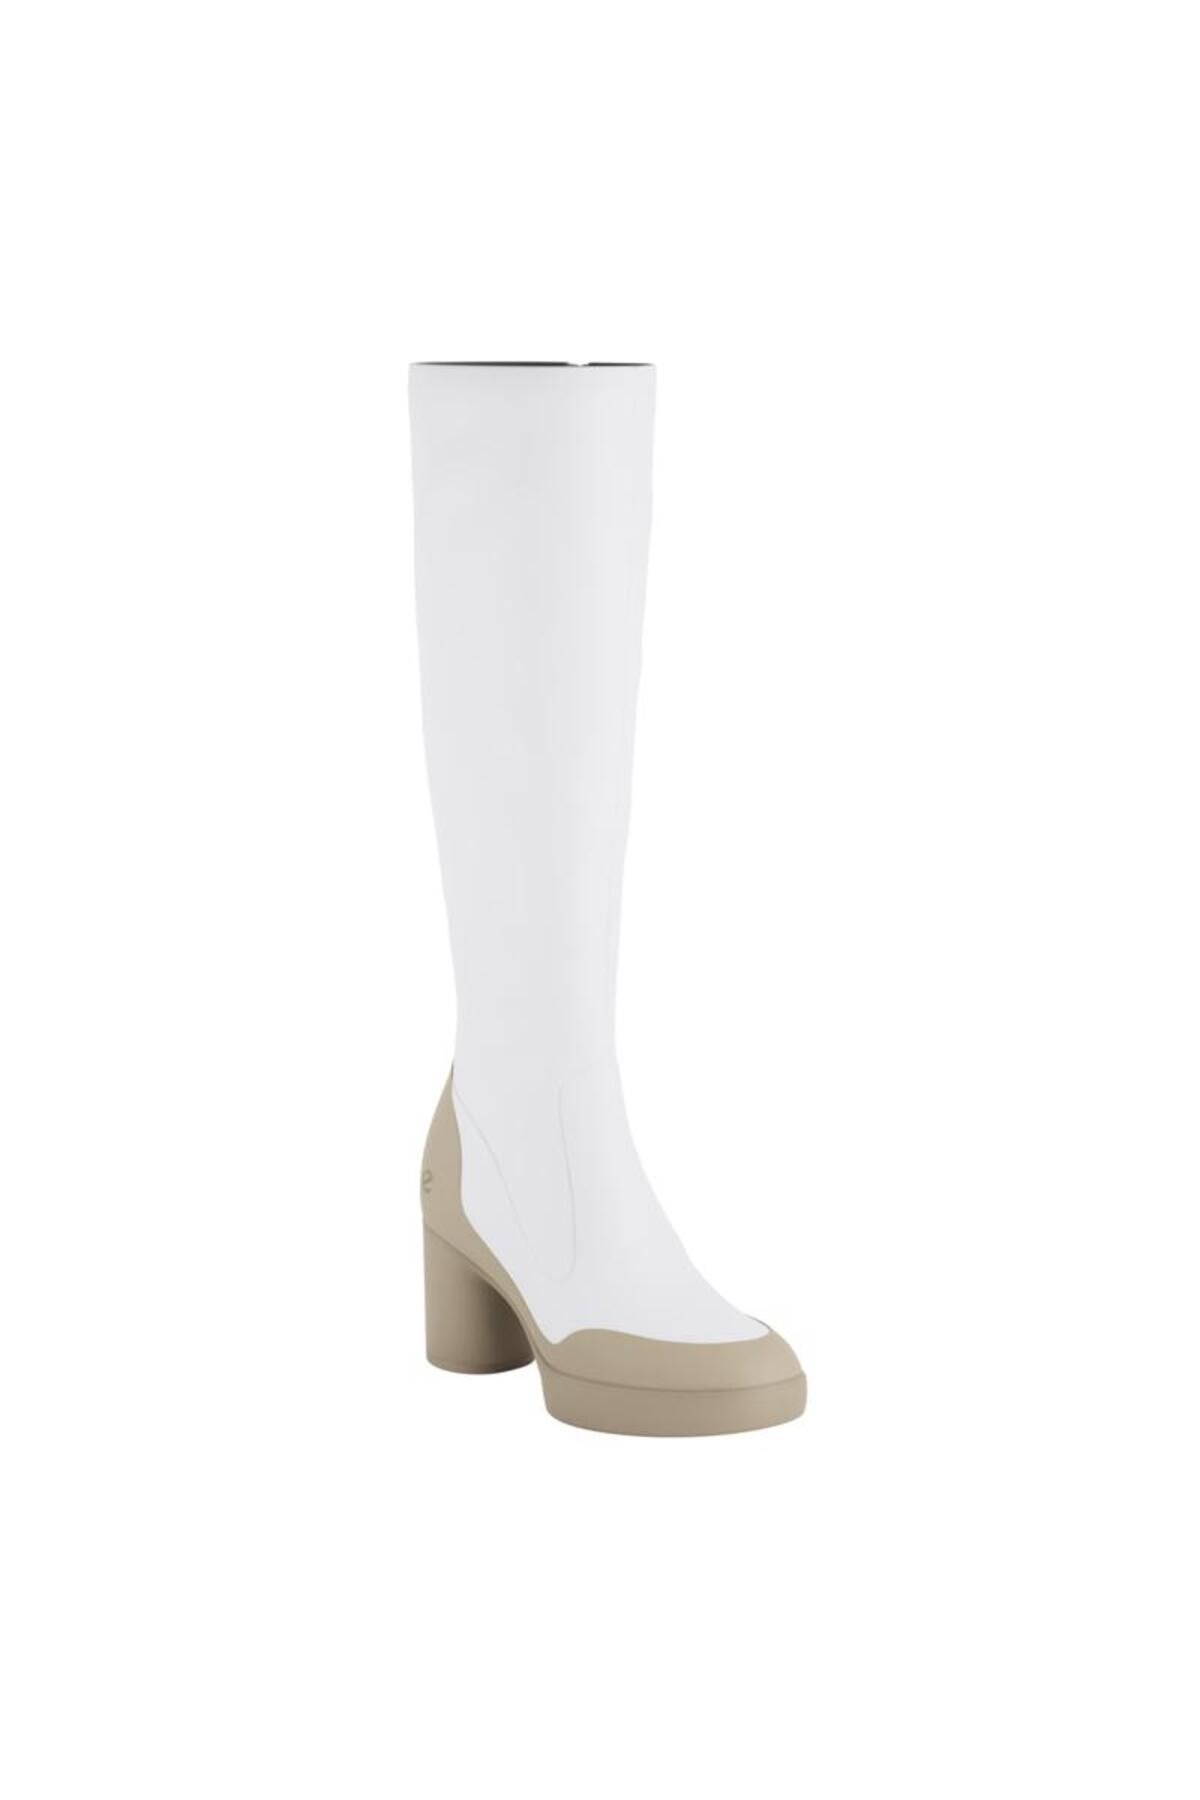 Ecco NRL Shape Sculpted Motion 55 Bright White